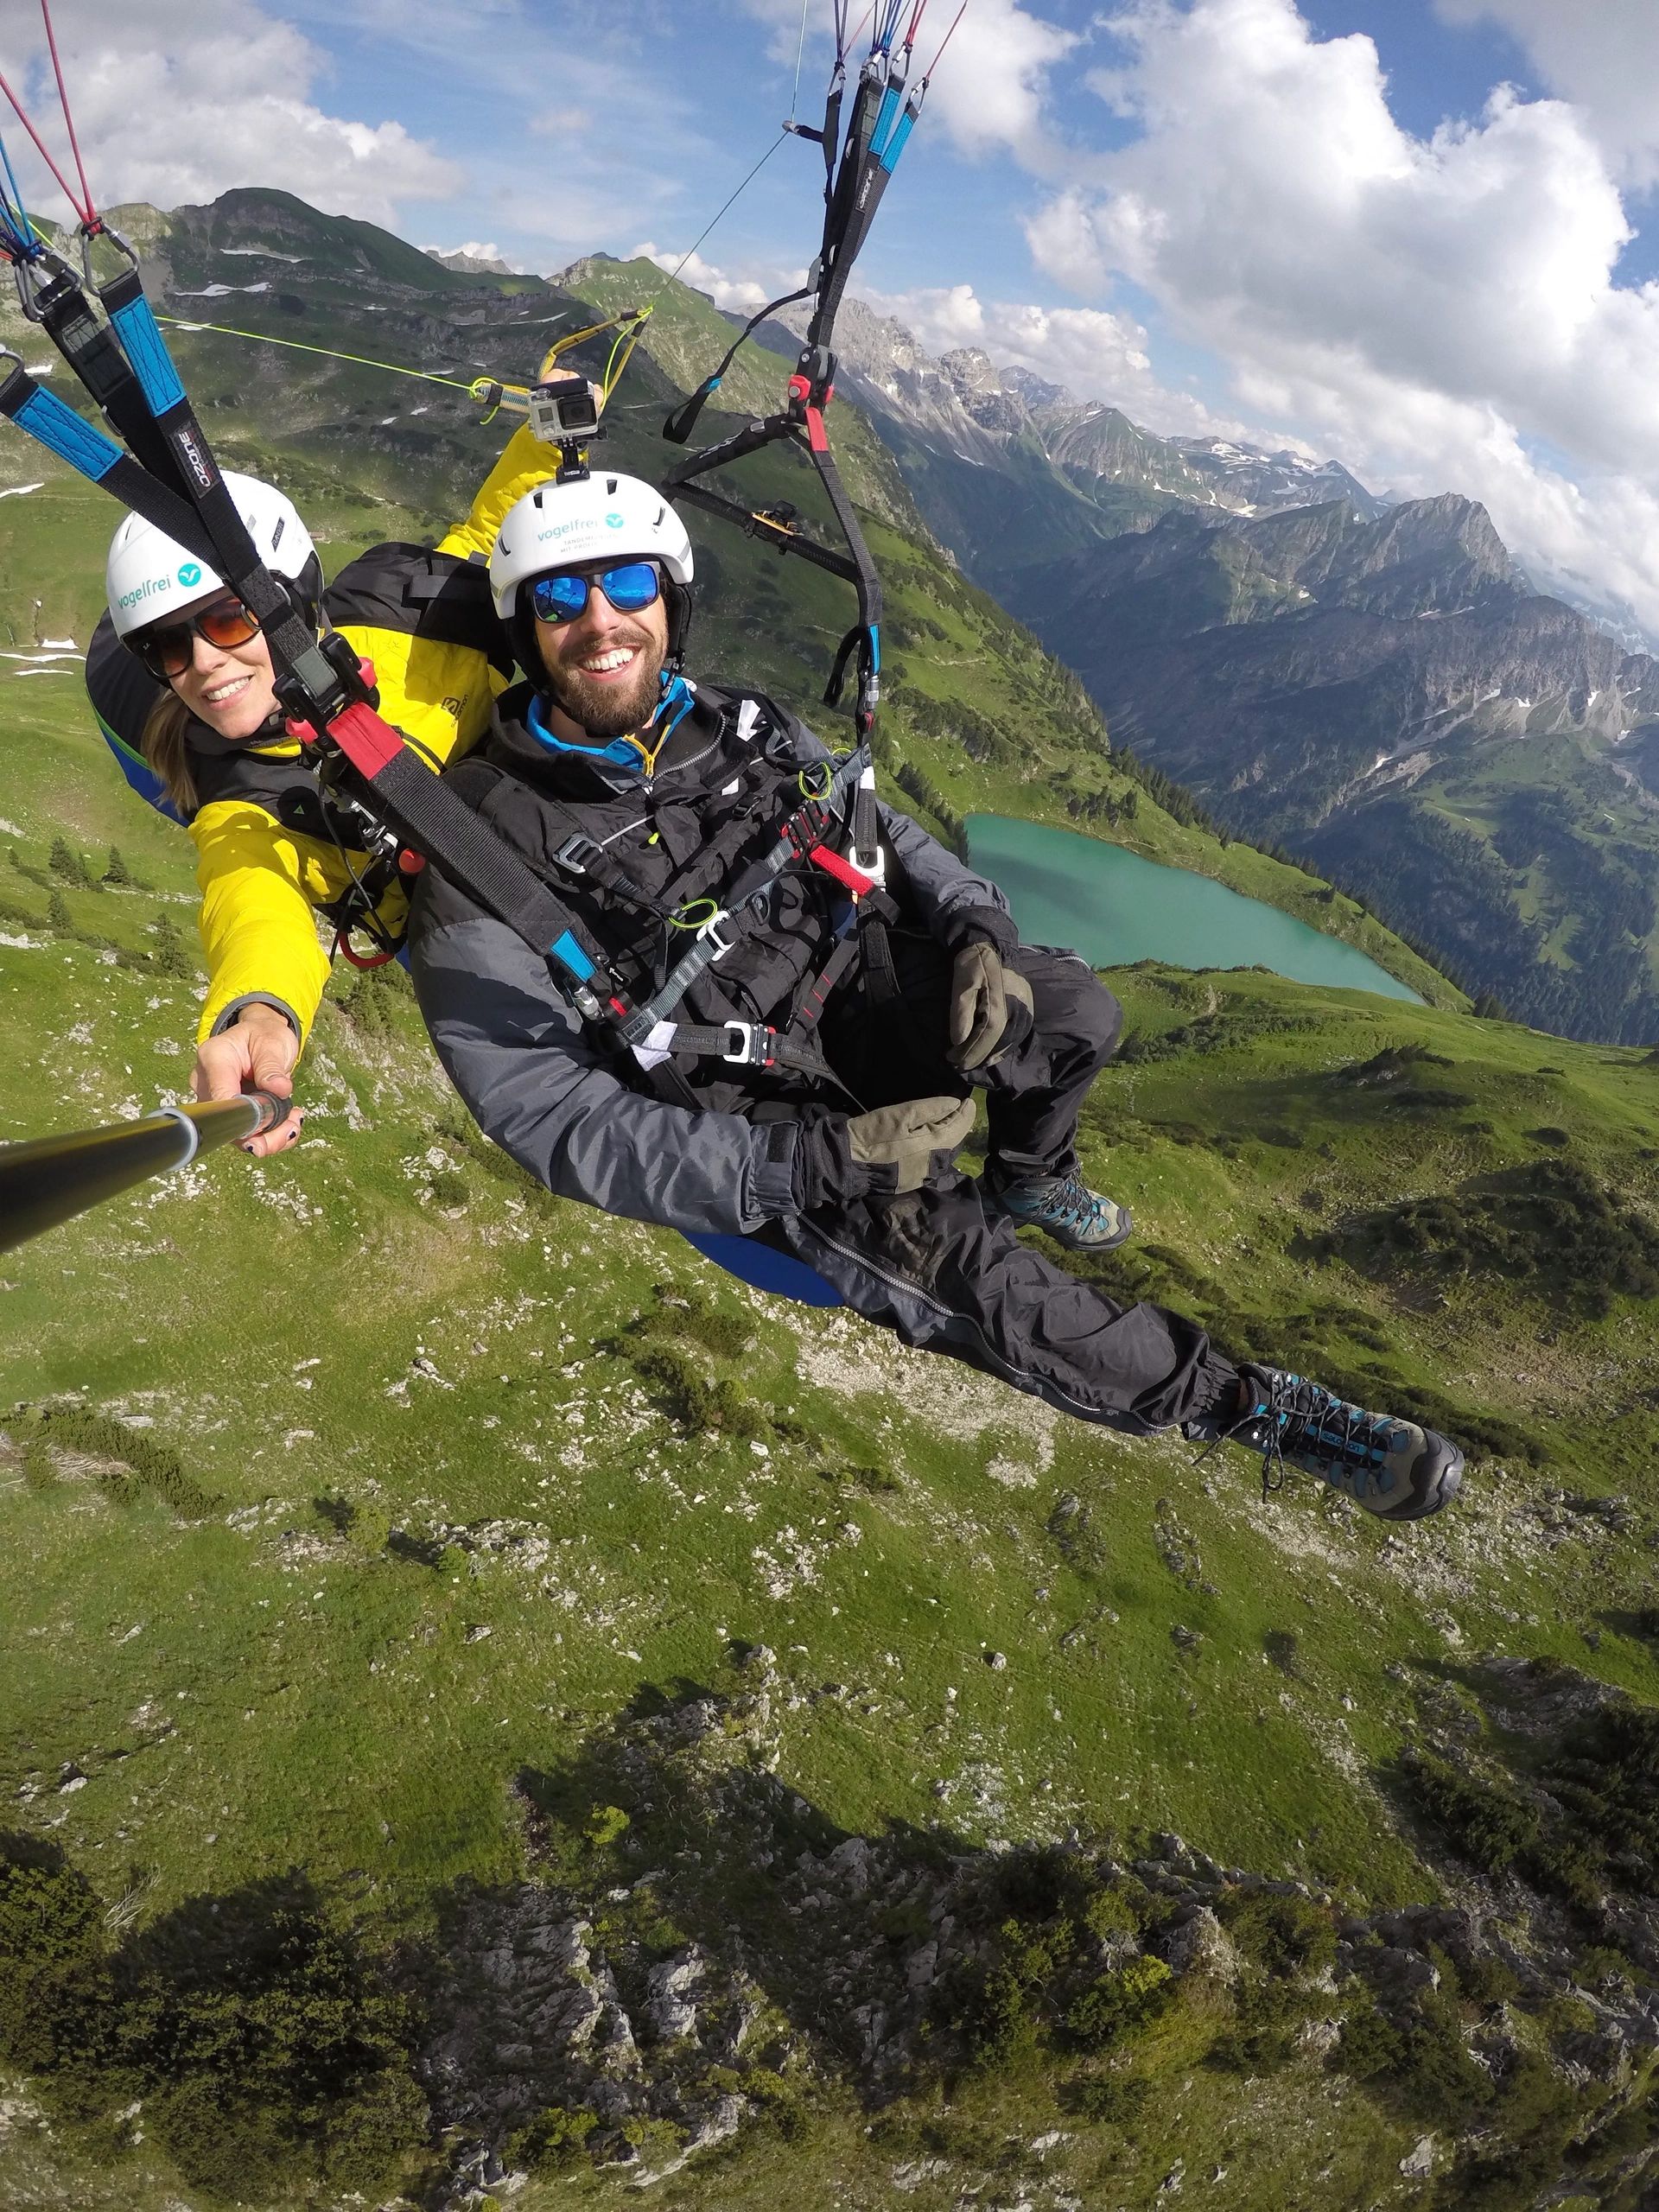 Tandem paragliding above the Nebelhorn in the German Alps. The Austrian Alps are in the background. 